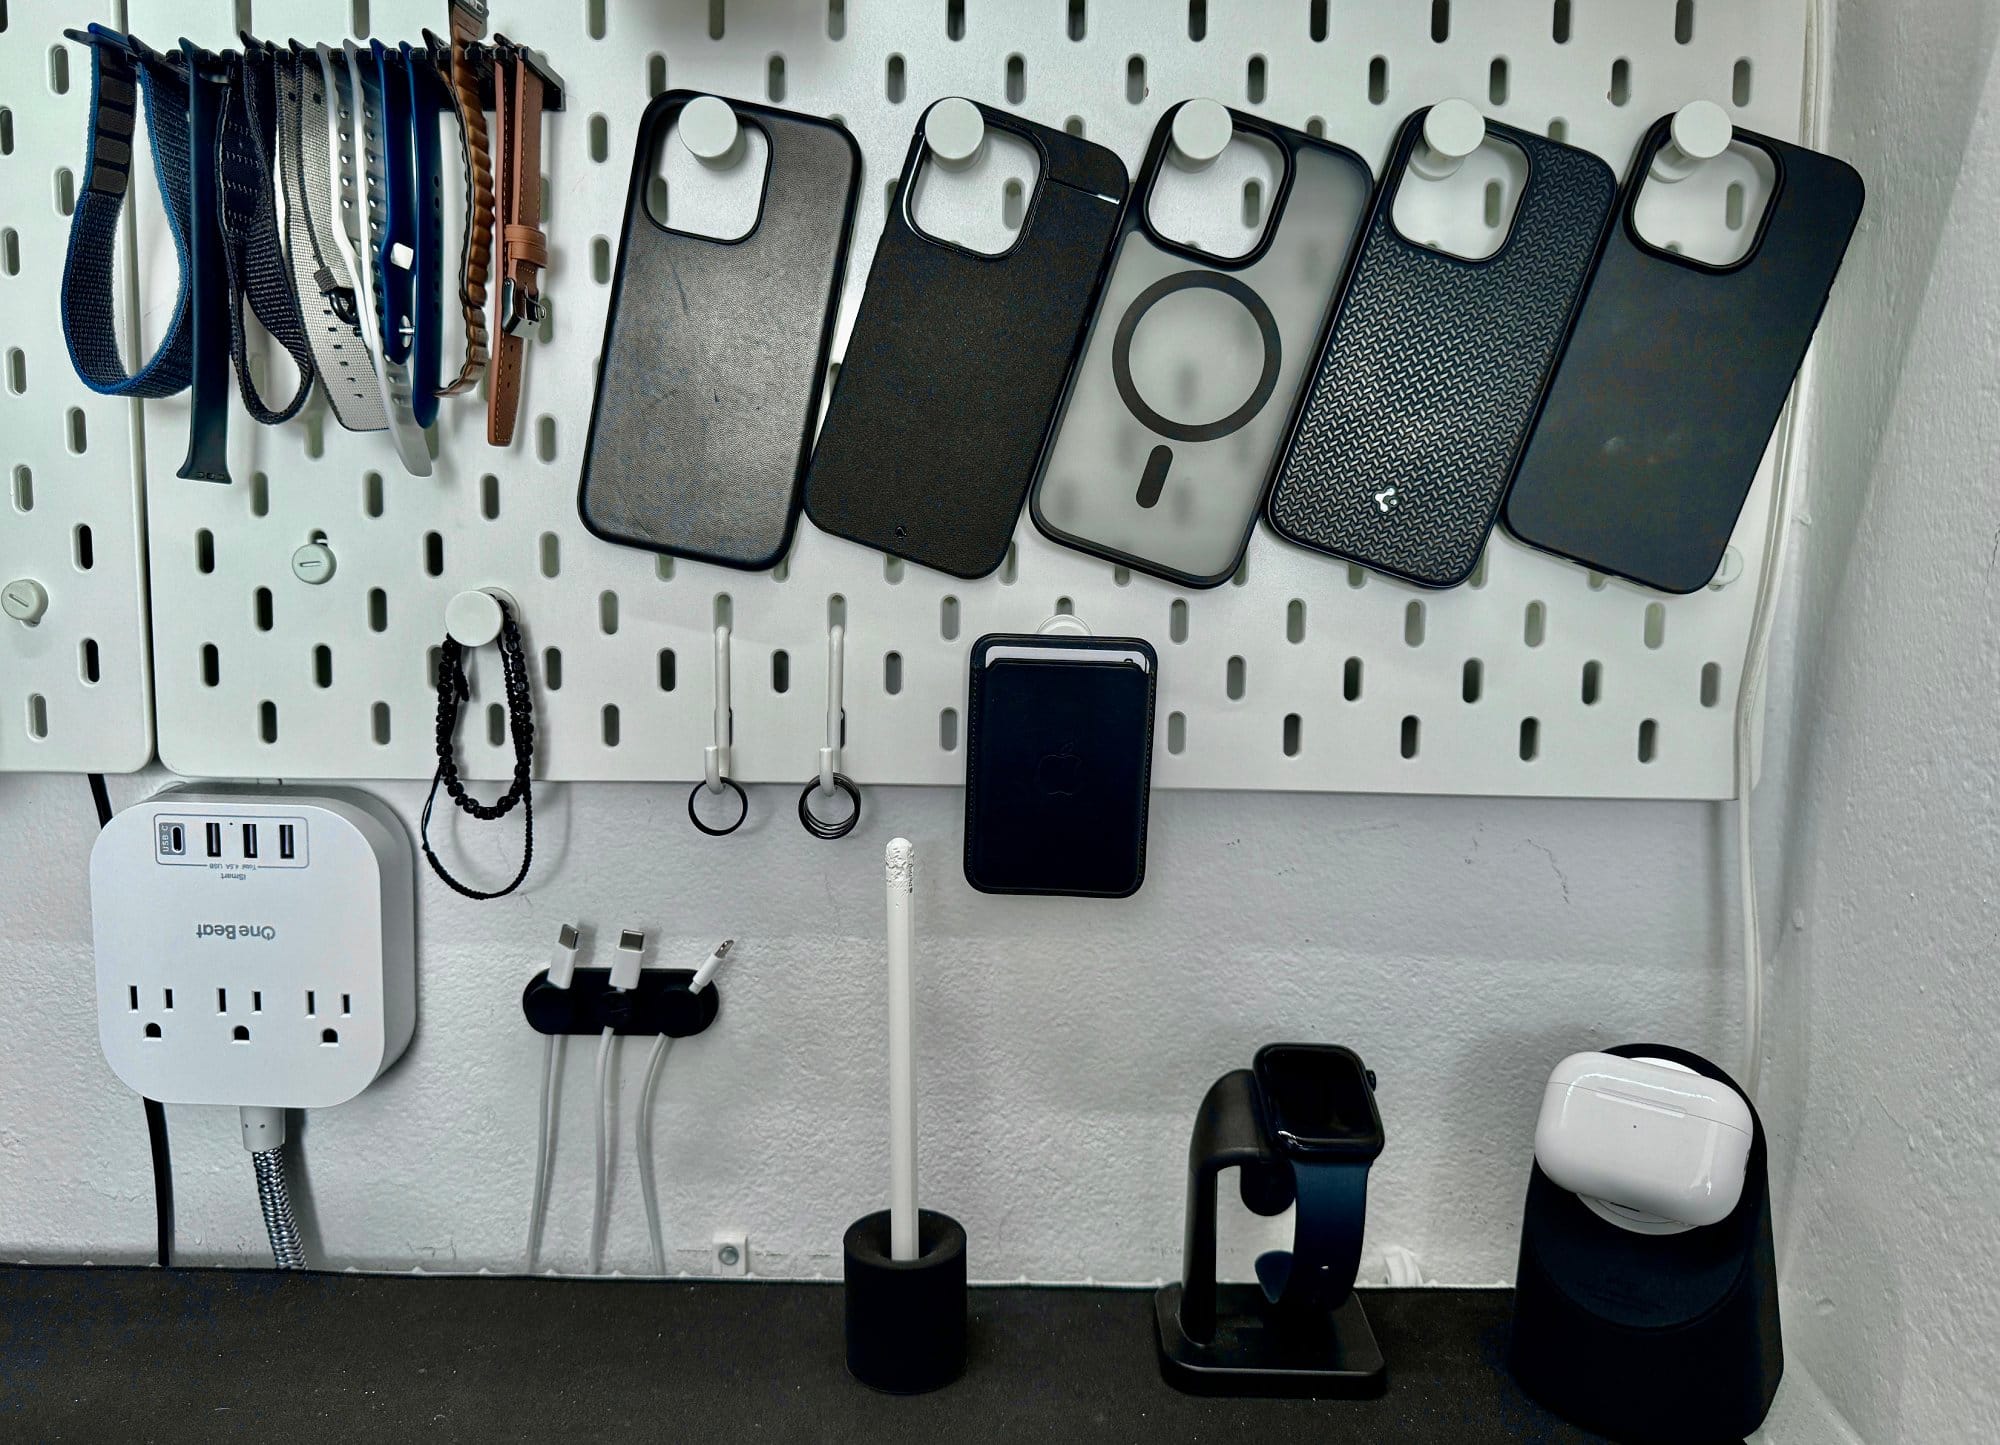 A pegboard organising space with various phone cases hung up, charging cables, a smartwatch on a stand, wireless earbuds in a case, and a multi-port power outlet on the left